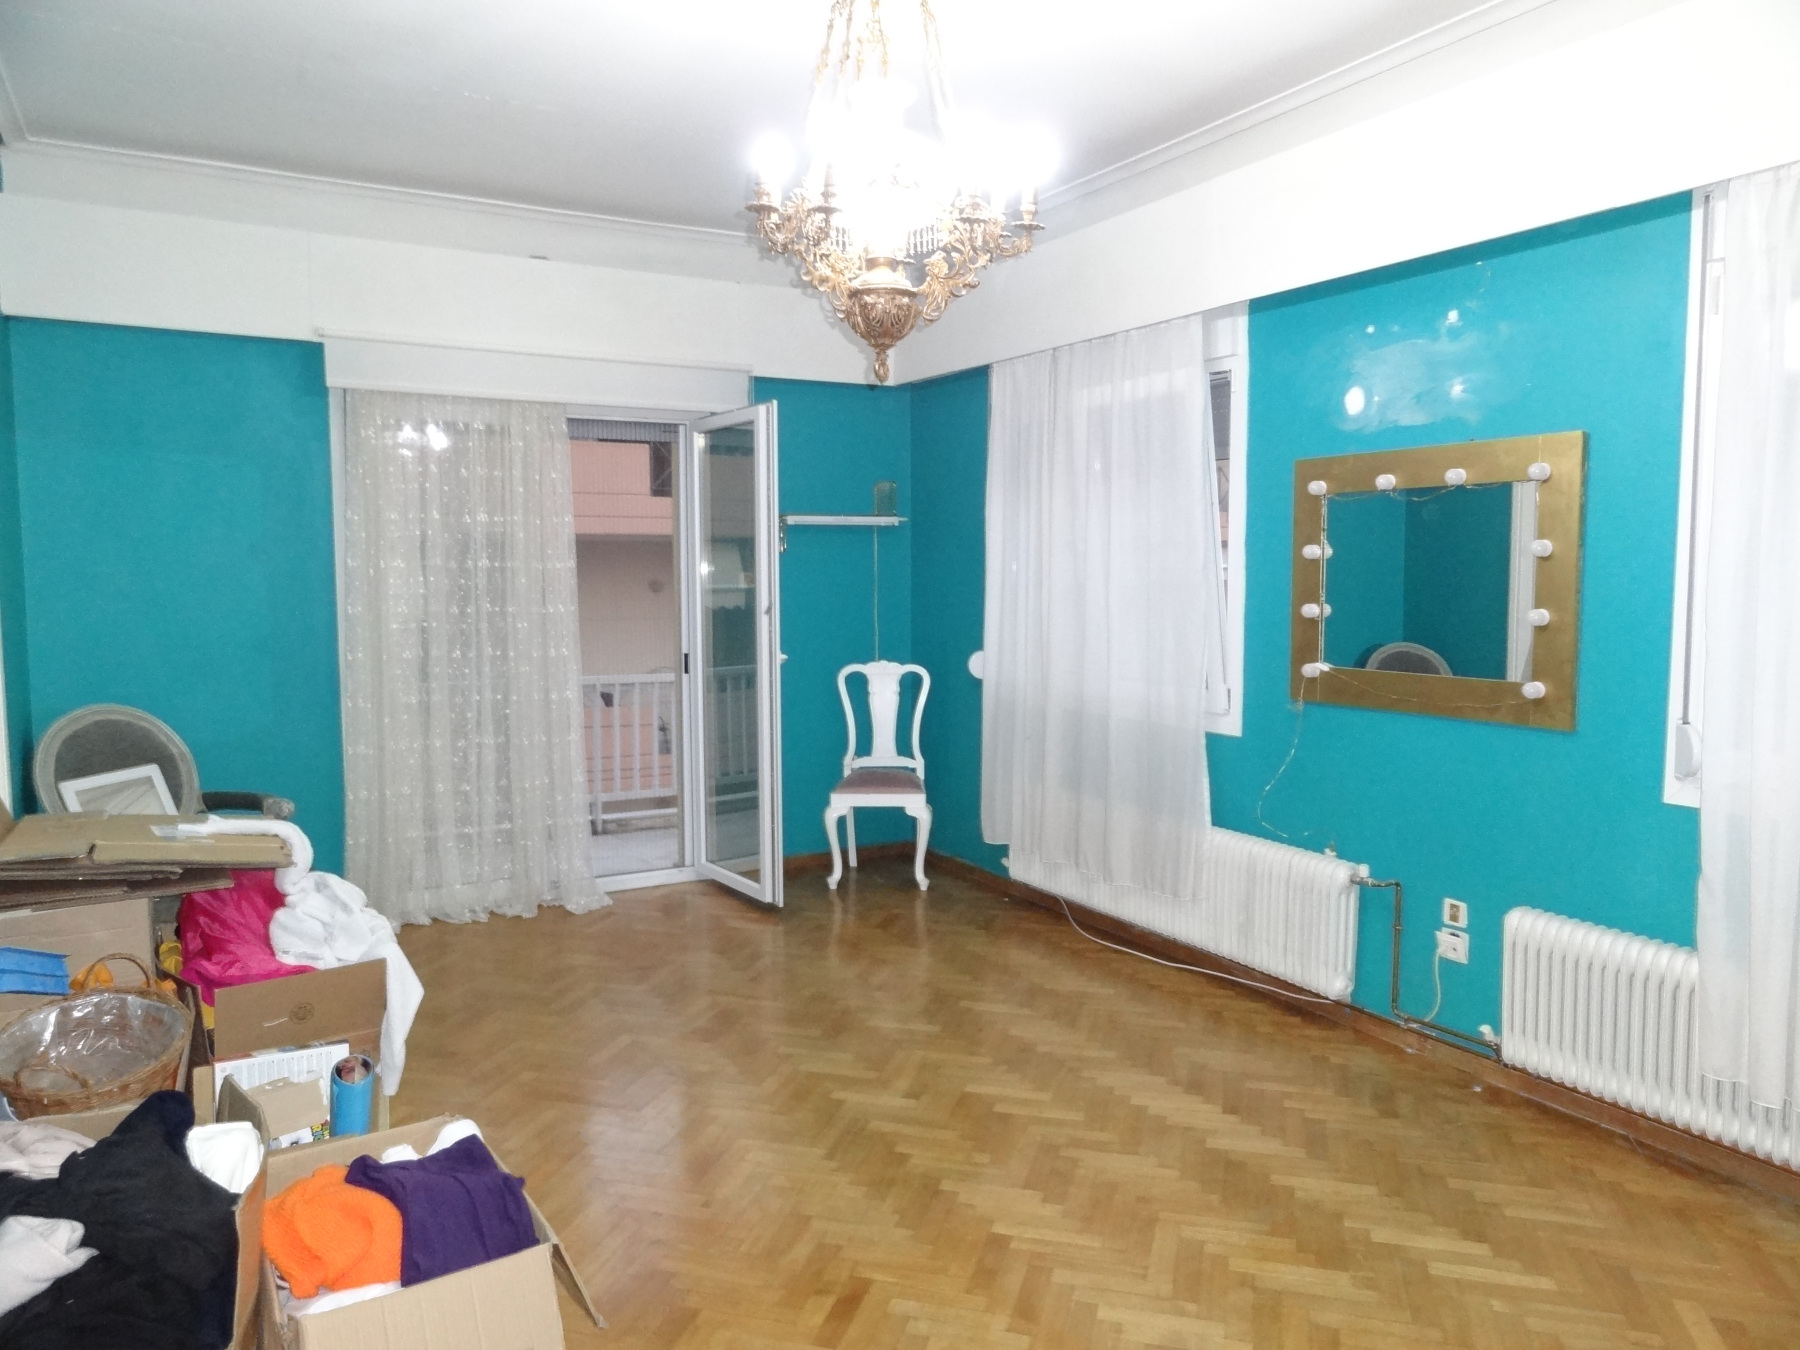 124 sq.m. apartment for rent 2nd floor with 2 bedrooms and fireplace near the center of Ioannina